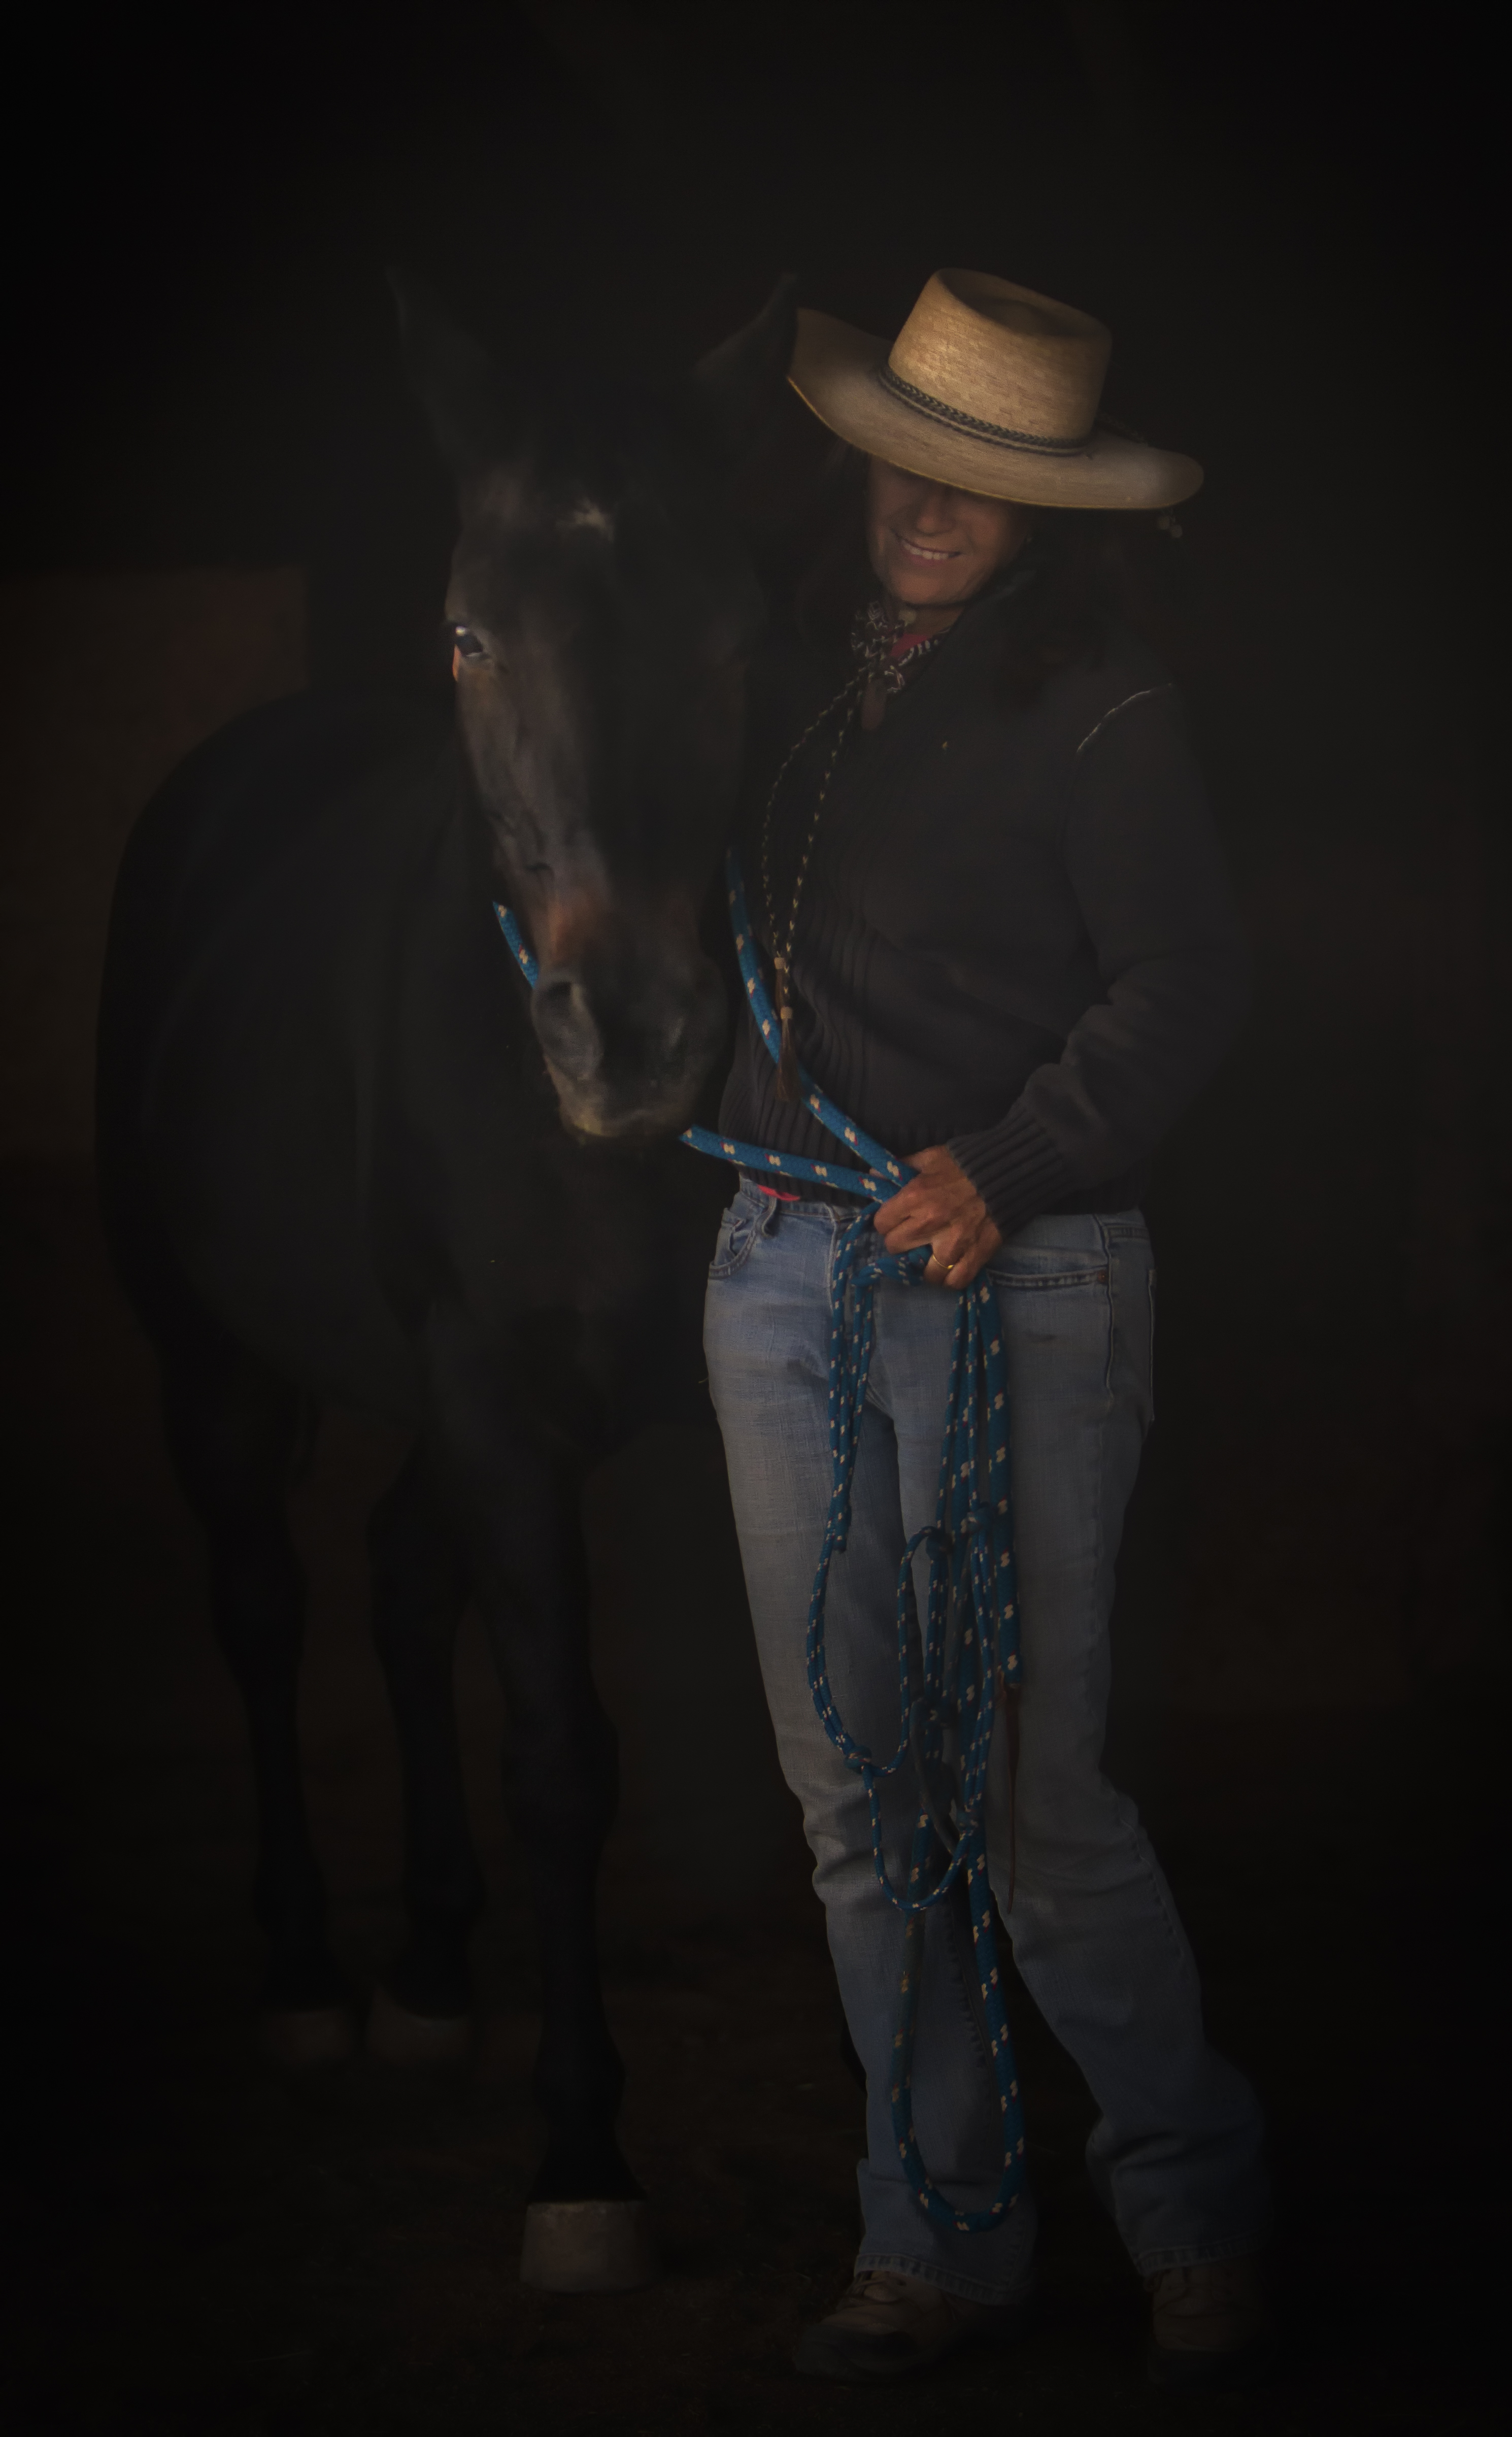 Zuzka's favorite picture of herself in the dark barn with me.